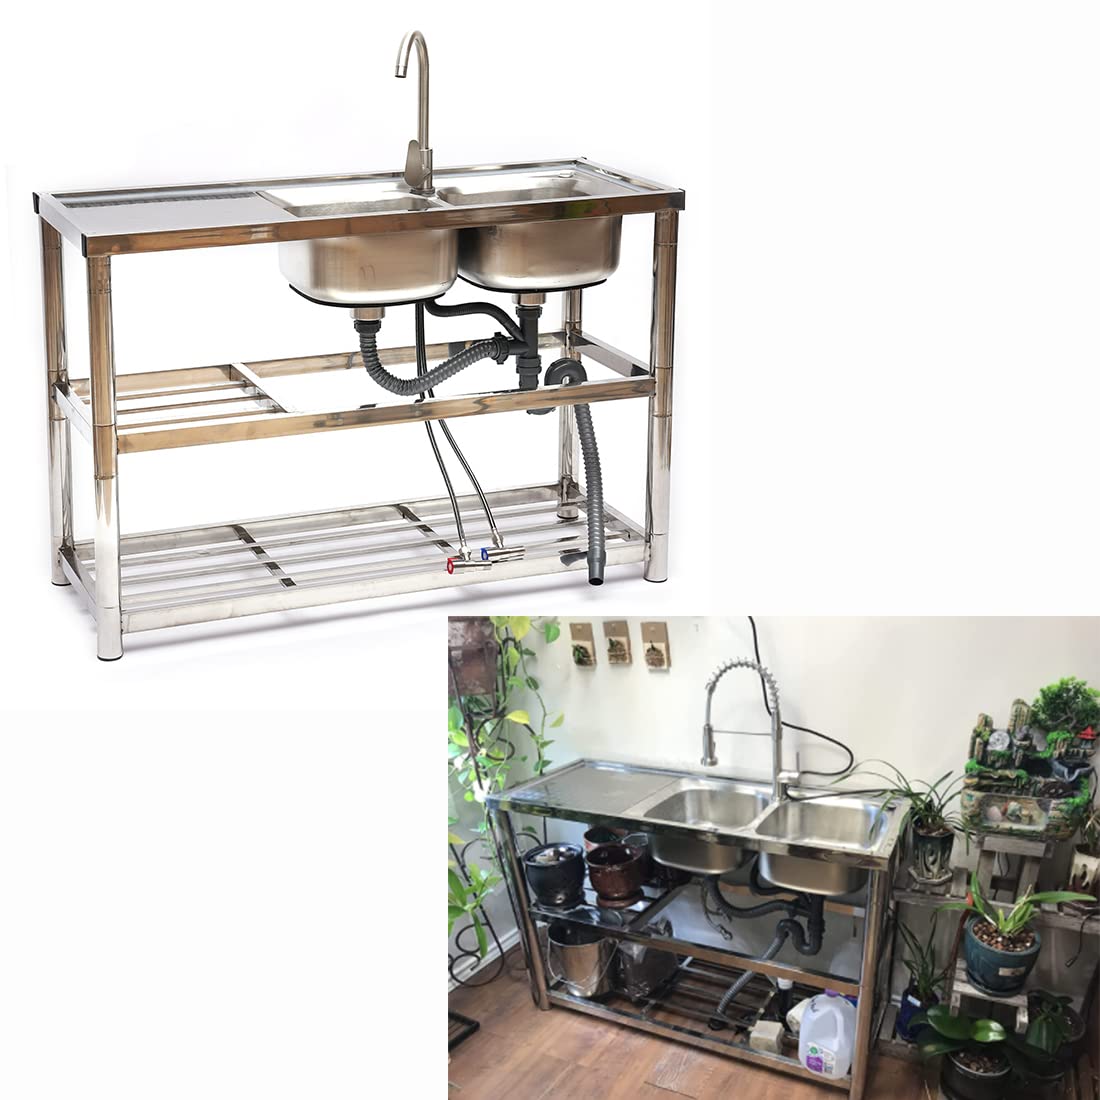 DNYSYSJ Commercial Kitchen Sink 2 Compartment Stainless Steel Utility Sink with 2-layer Shelves for Garden, Restaurant, Kitchen, Laundry Room, Outdoor